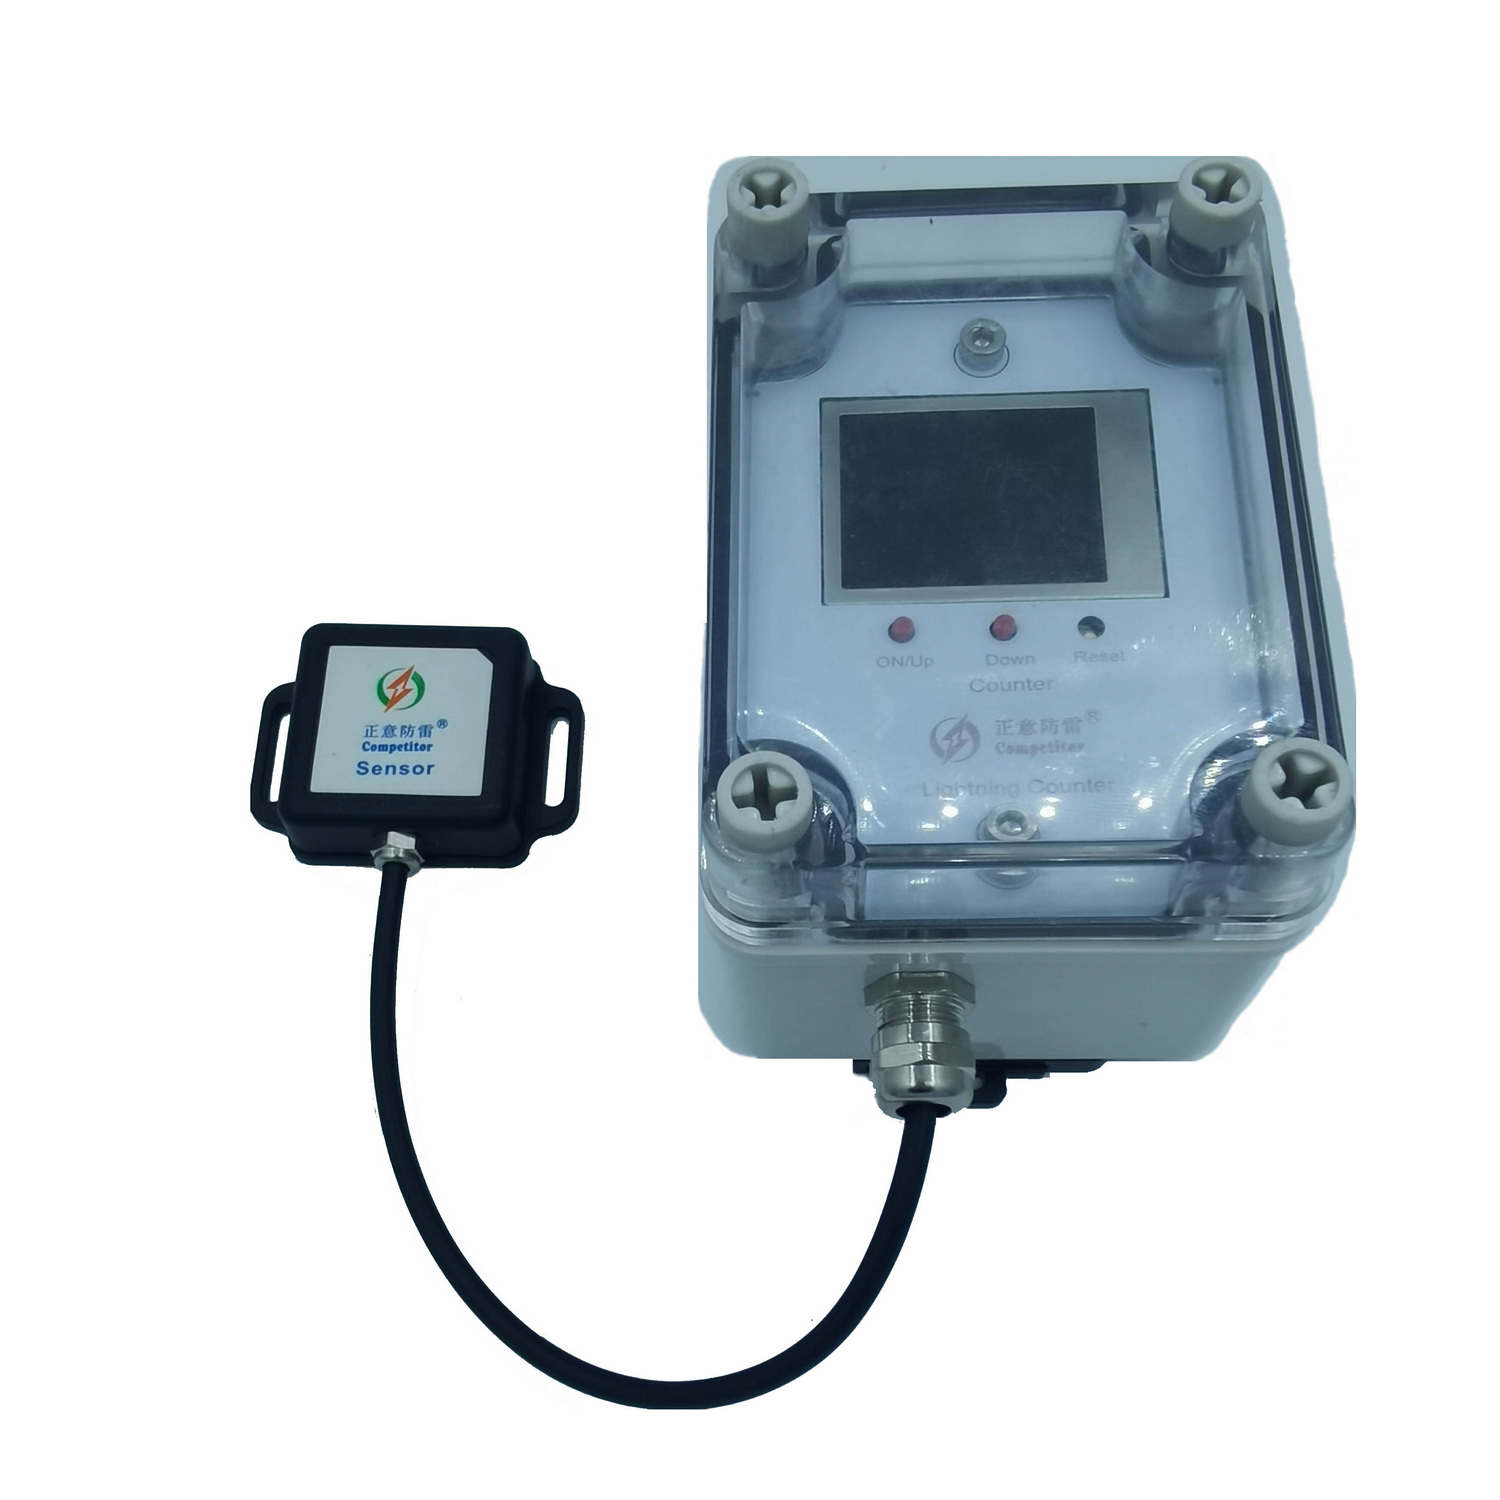 LCD Screen Lightning Monitoring and Counting Device